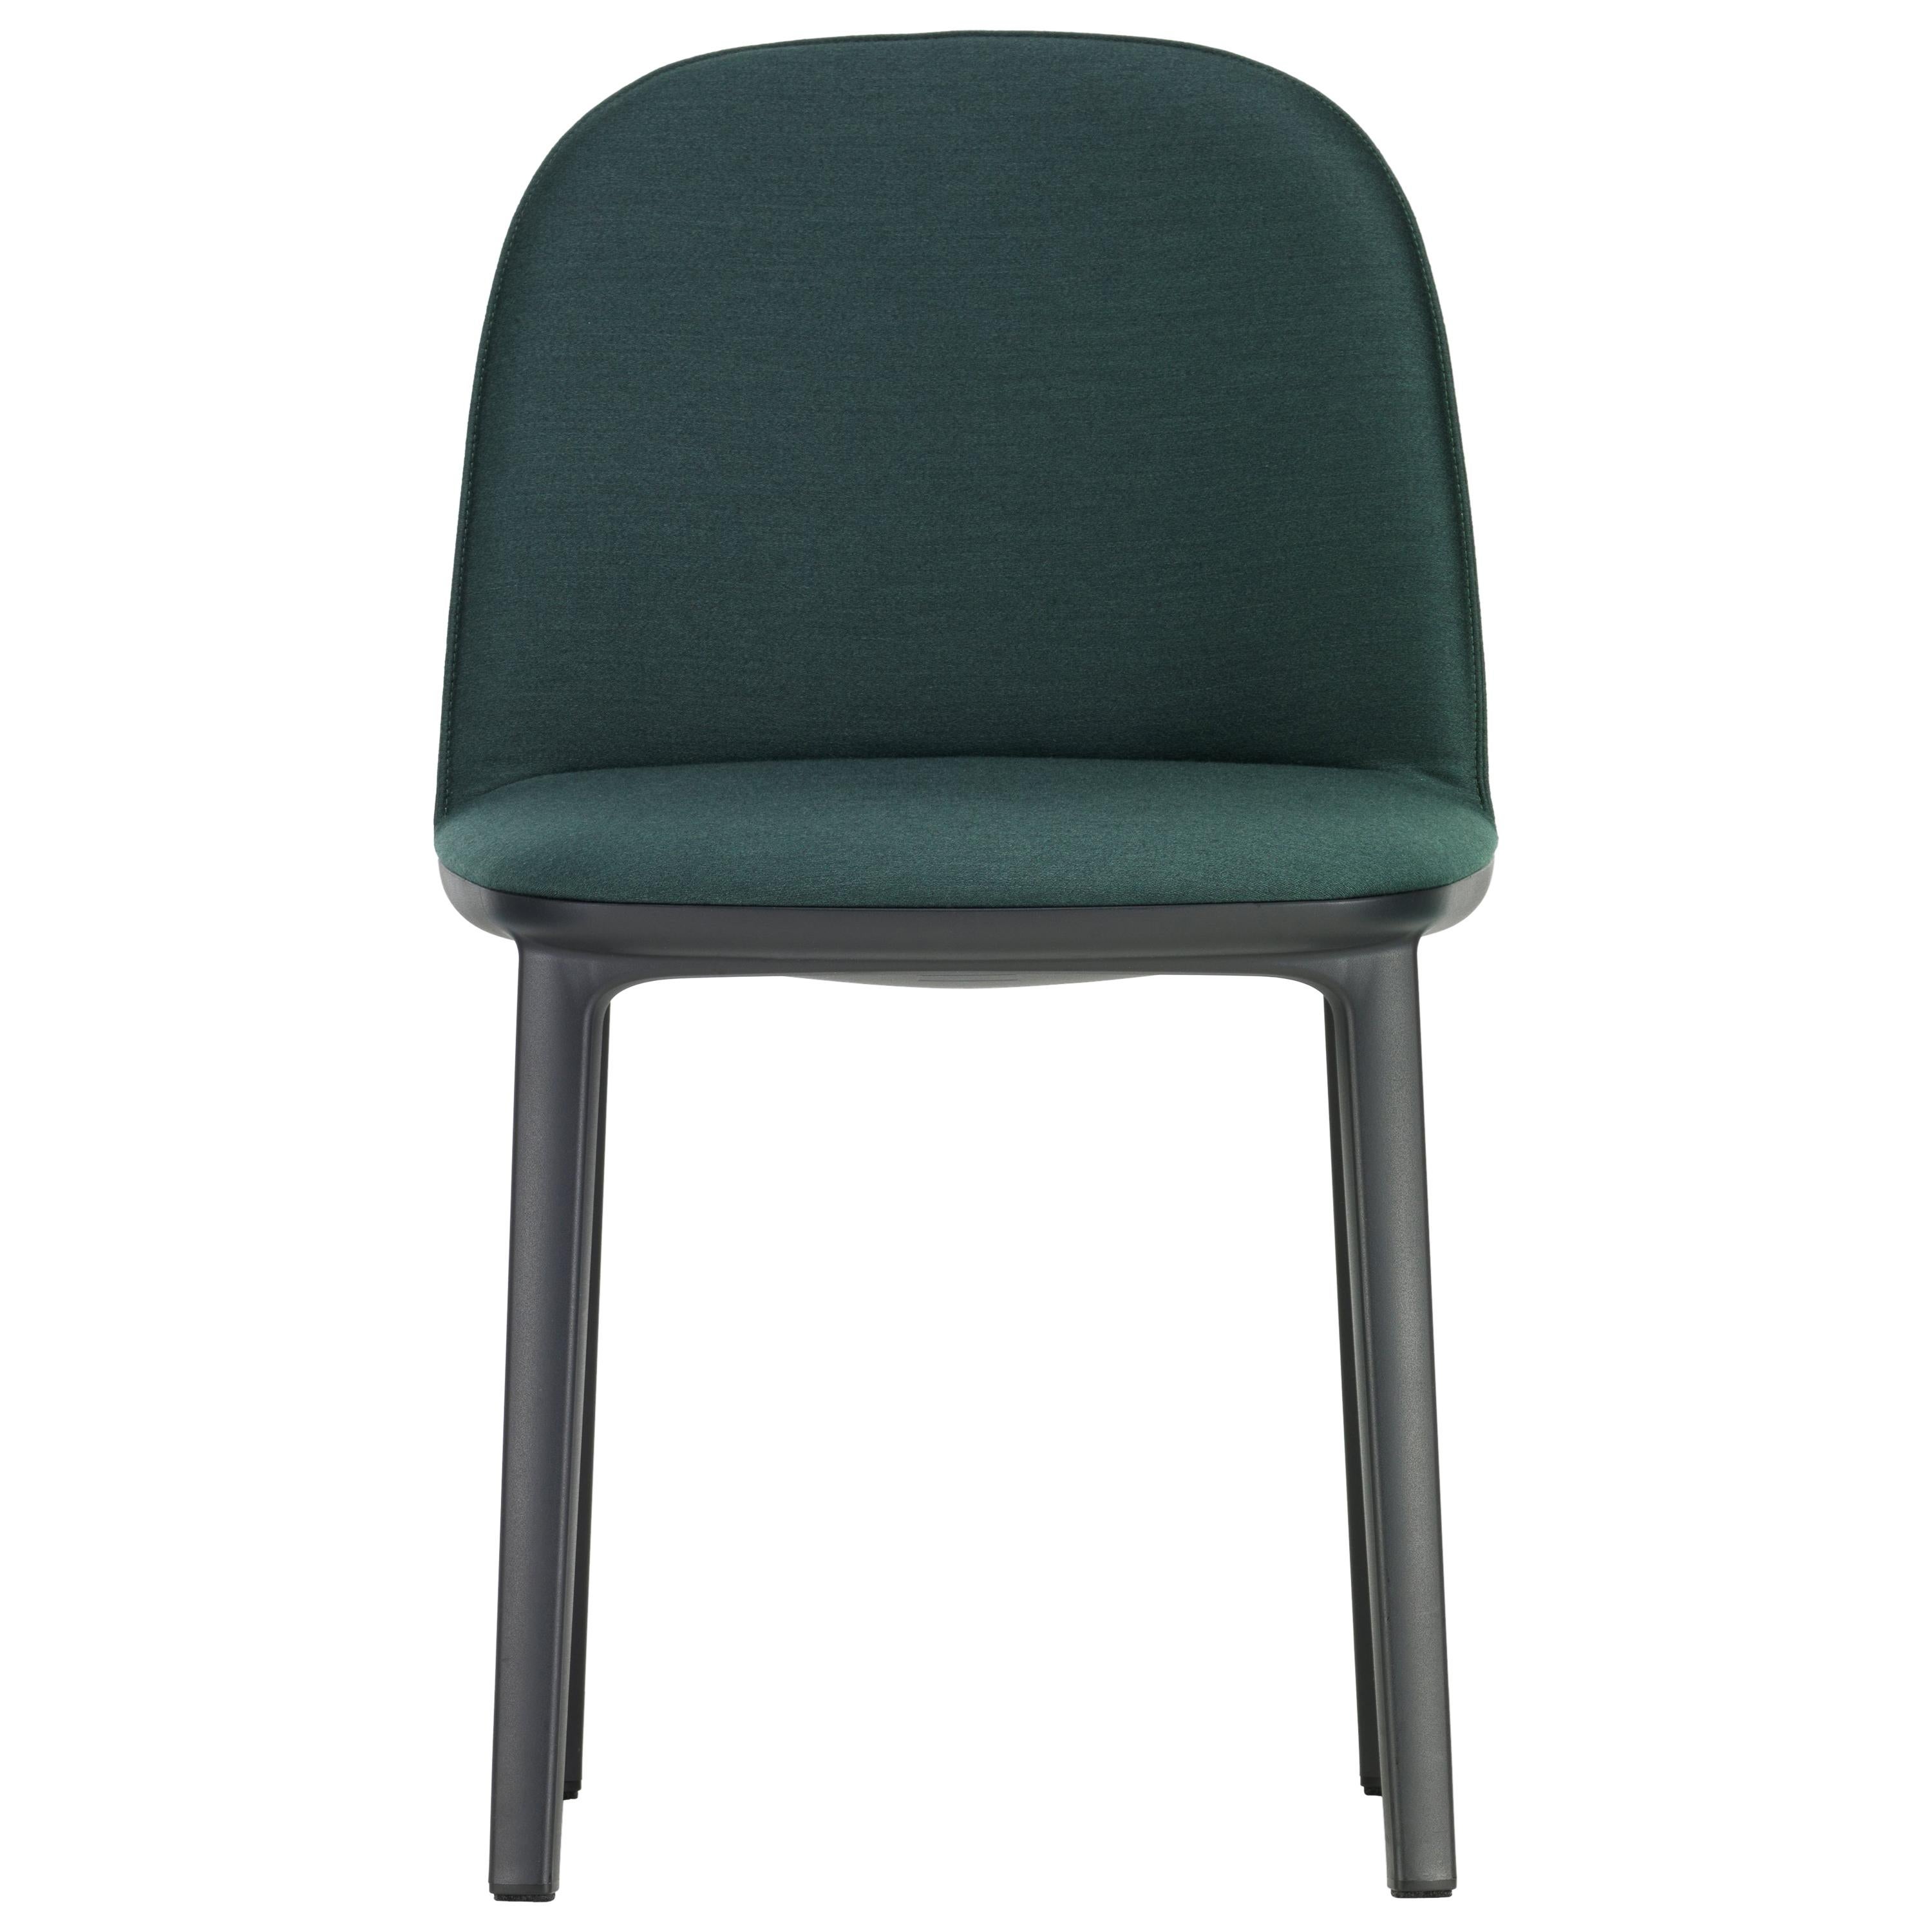 Vitra Softshell Side Chair in Hunter Green Aura by Ronan & Erwan Bouroullec For Sale